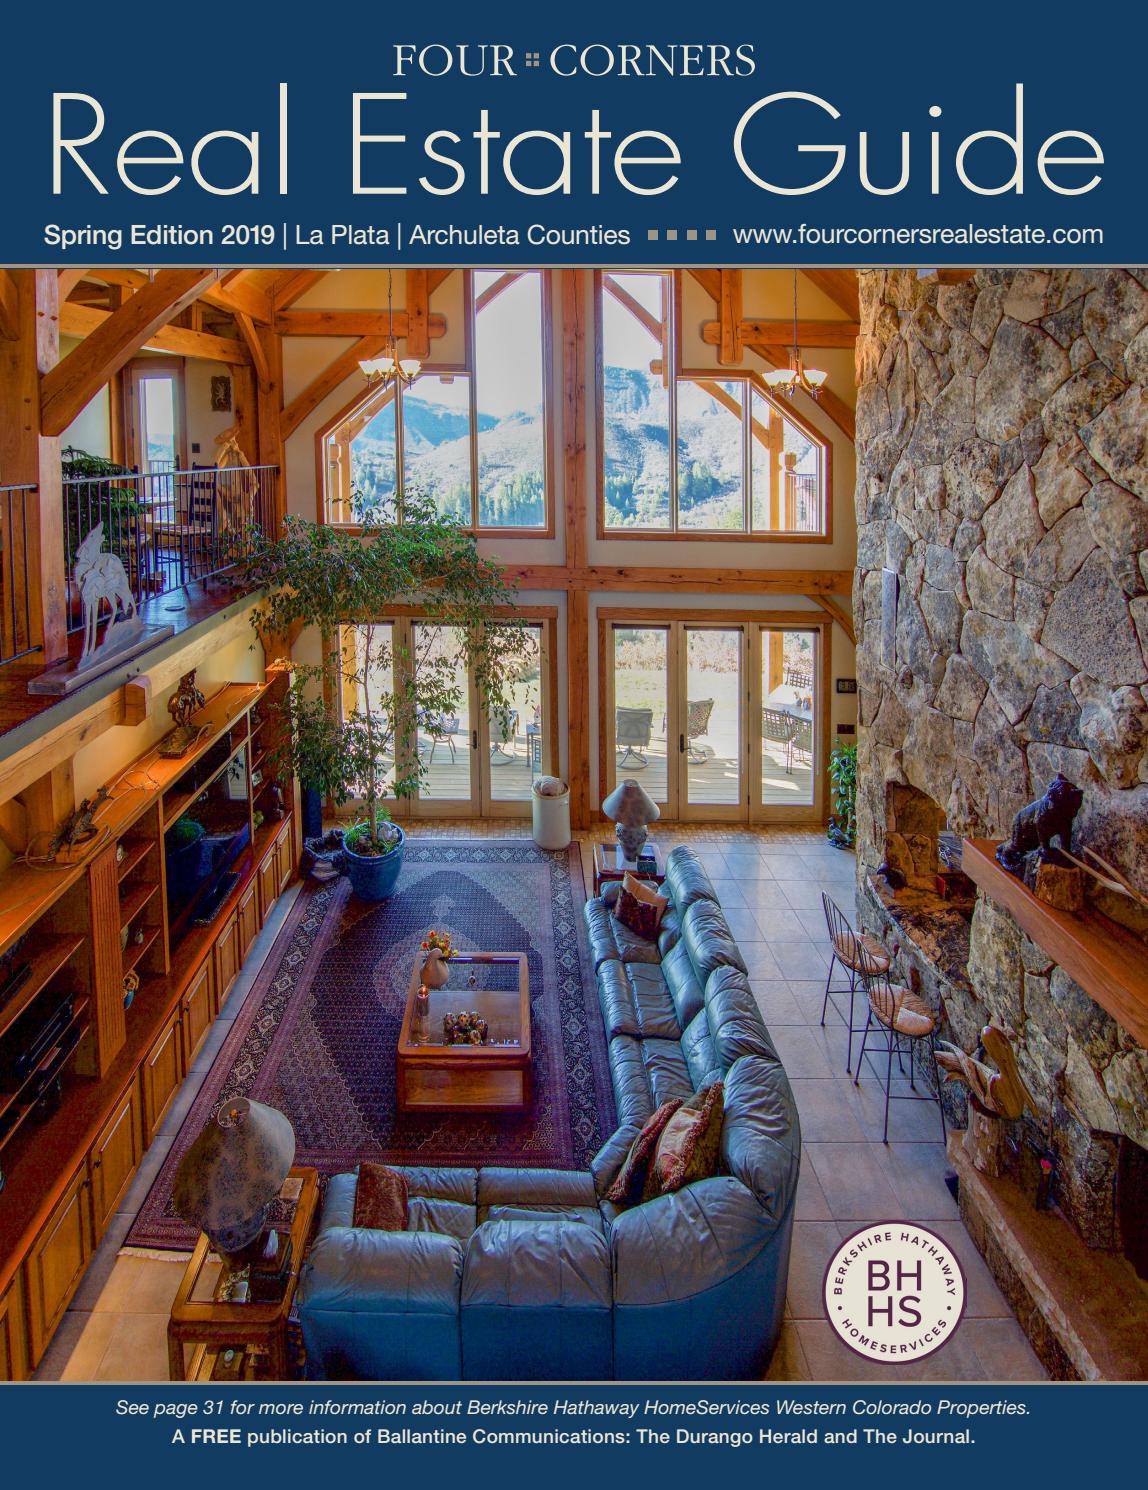 Rio Grande Fireplace New Real Estate Guide Spring 2019 by Ballantine Munications